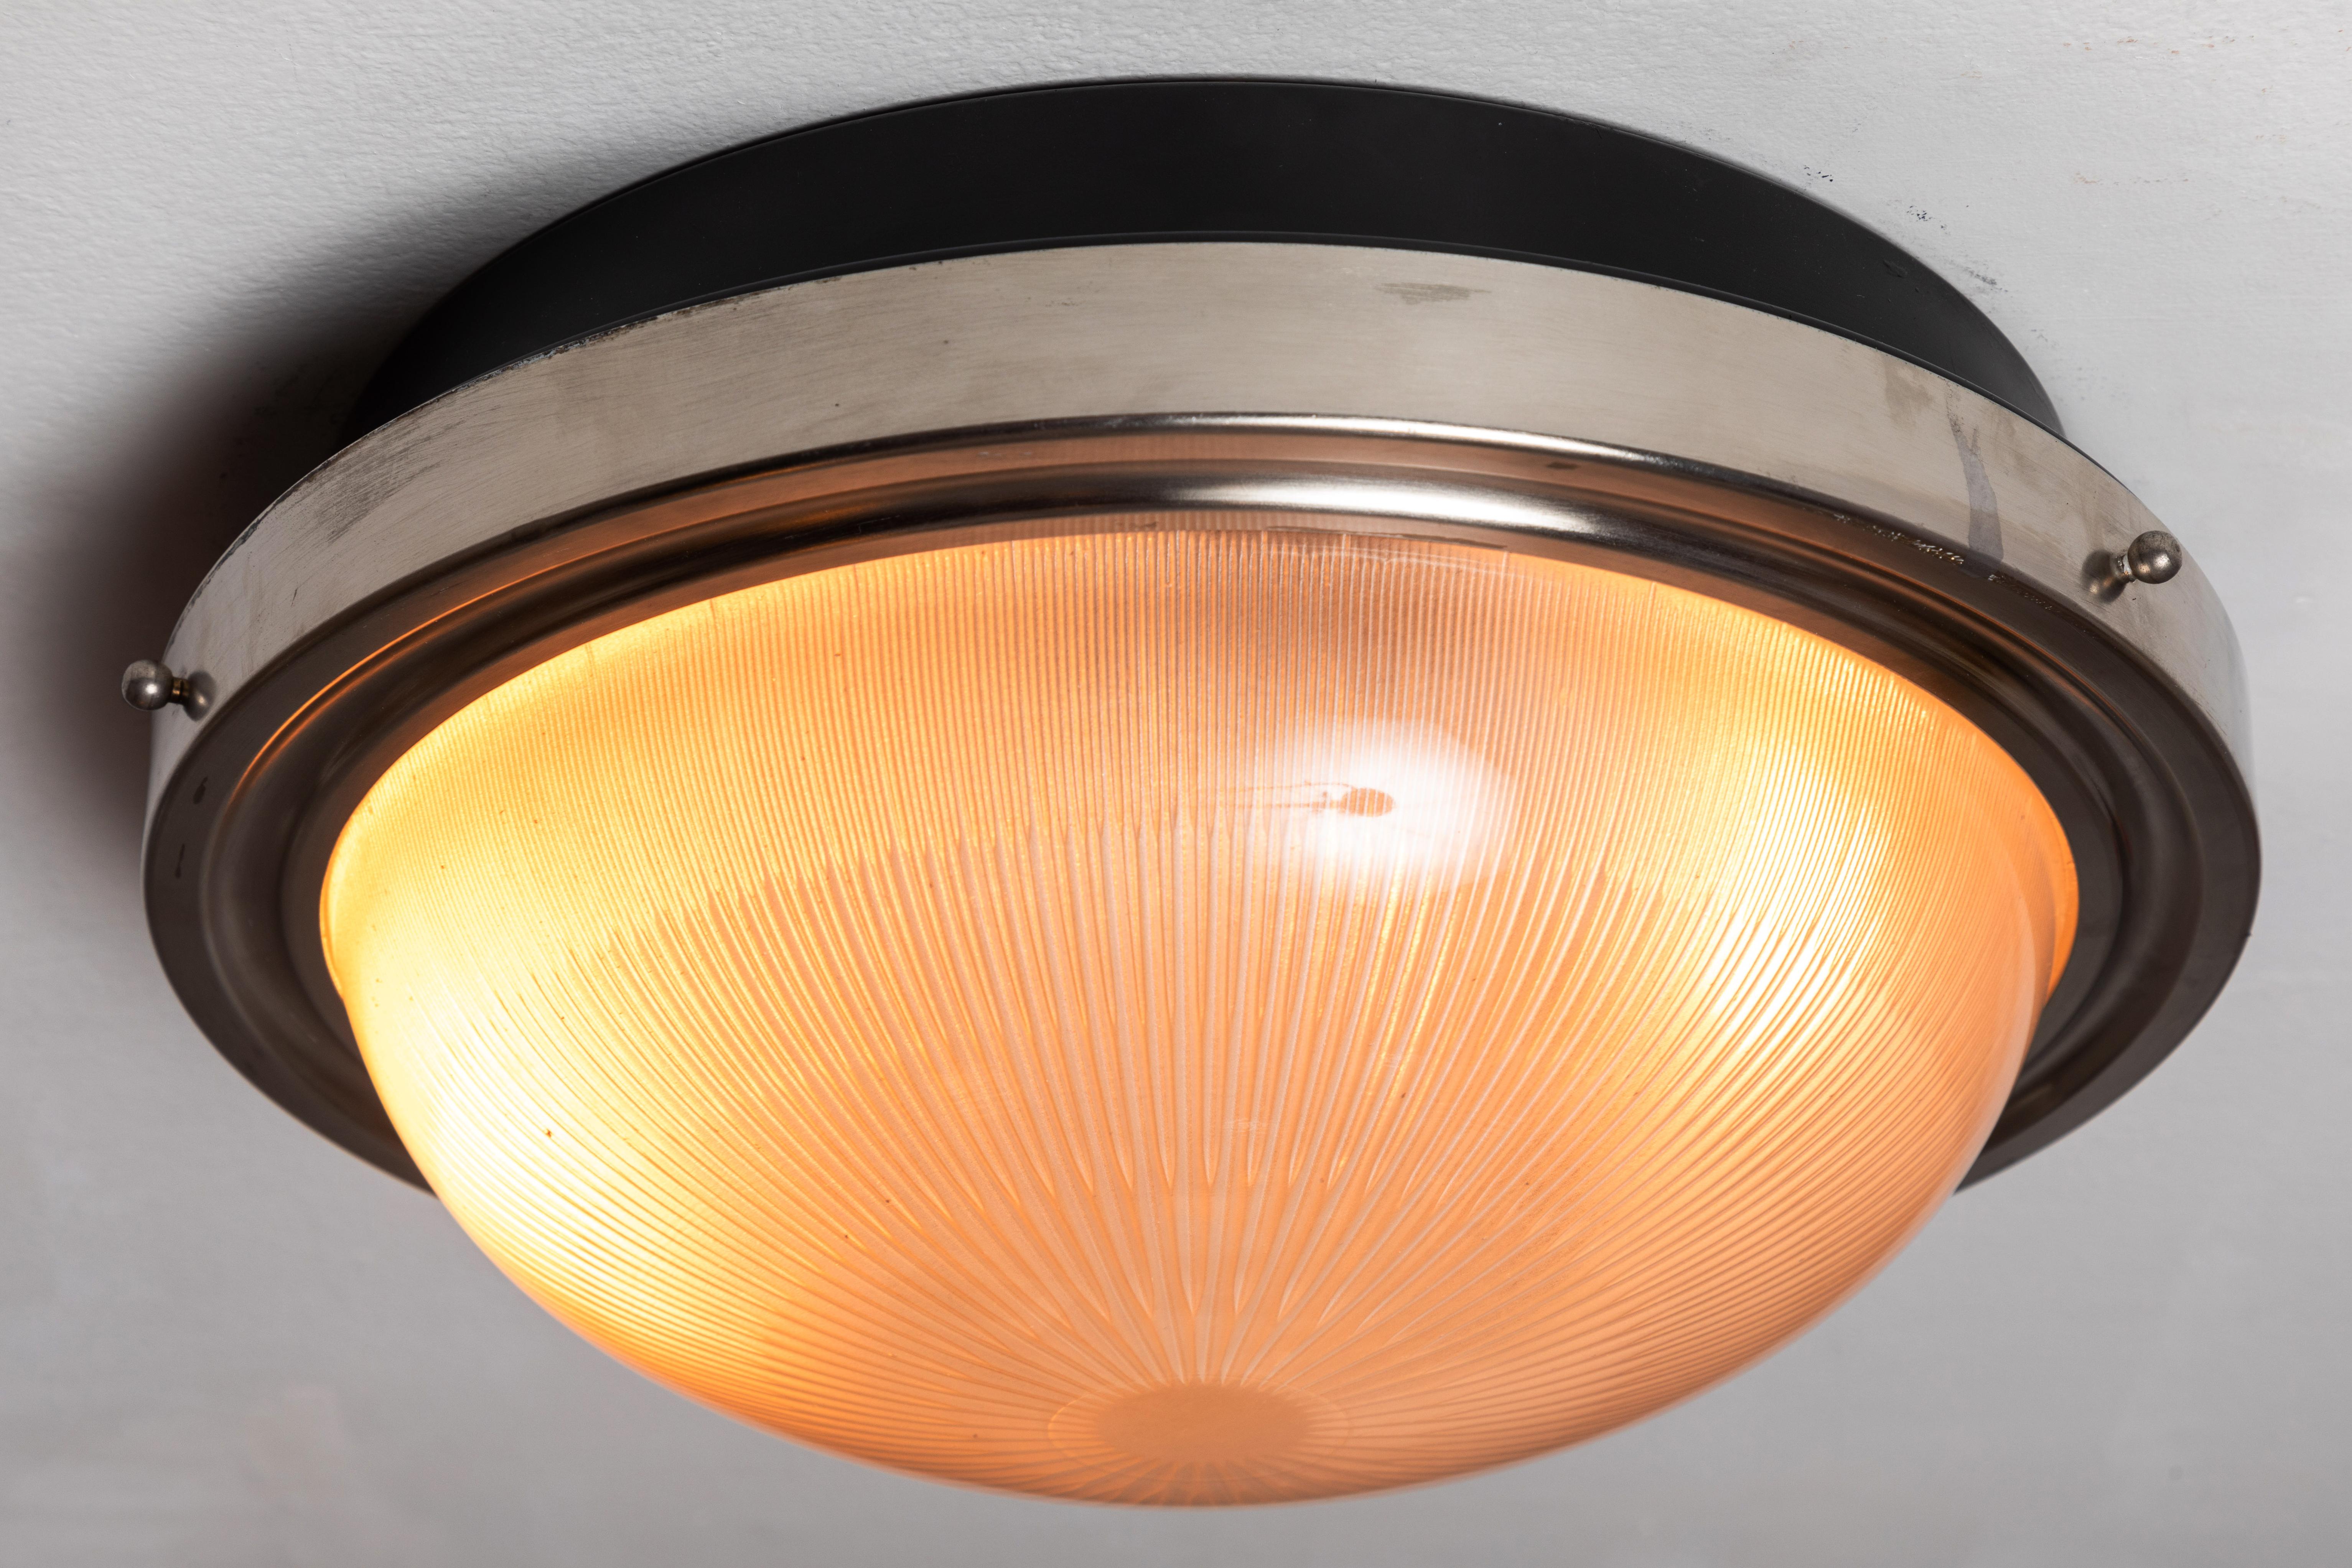 1960s Sergio Mazza nickeled brass ceiling or wall light for Artemide. Executed in pressed opaline glass, black painted metal and nickeled brass.

Born in Italy in 1931, Sergio Mazza created numerous iconic designs for Artemide throughout the 1960s,